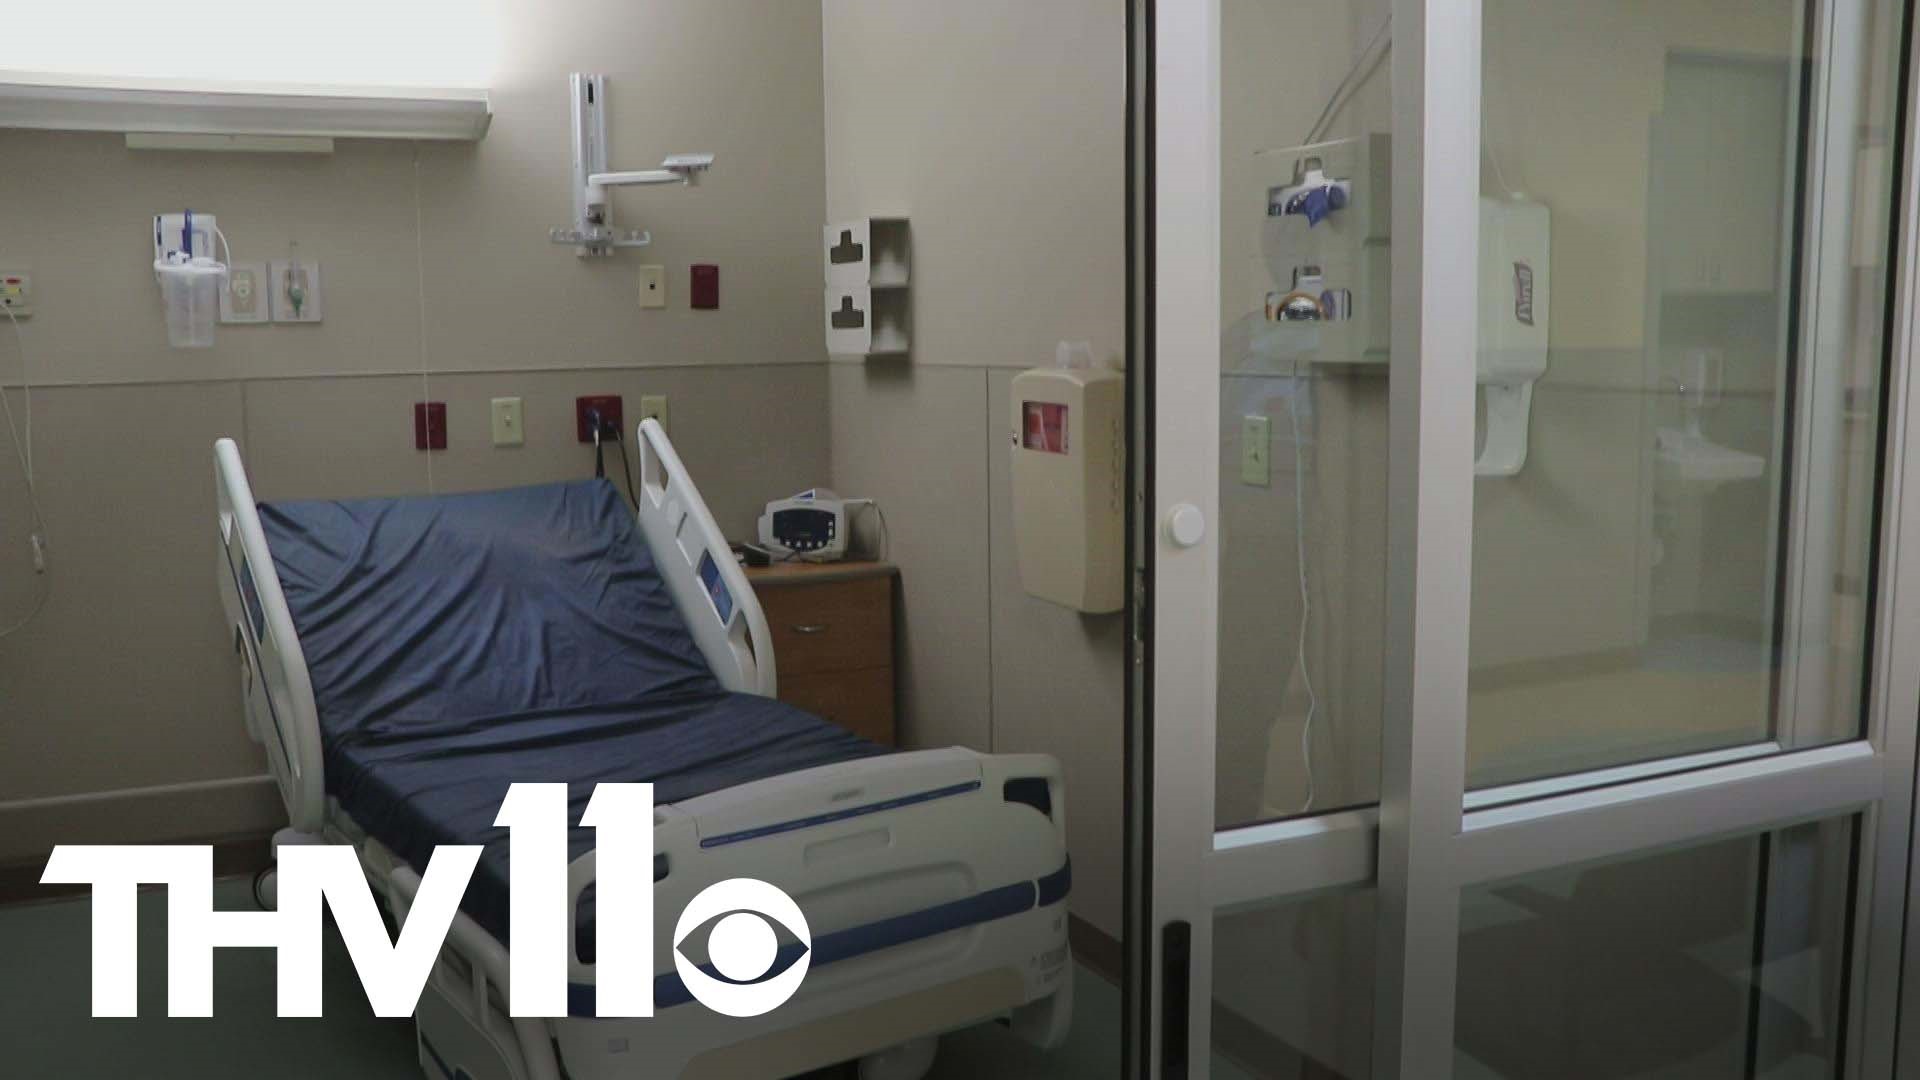 Despite the COVID-19 virus spreading around the state, hospitals are seeing less patients this time around.